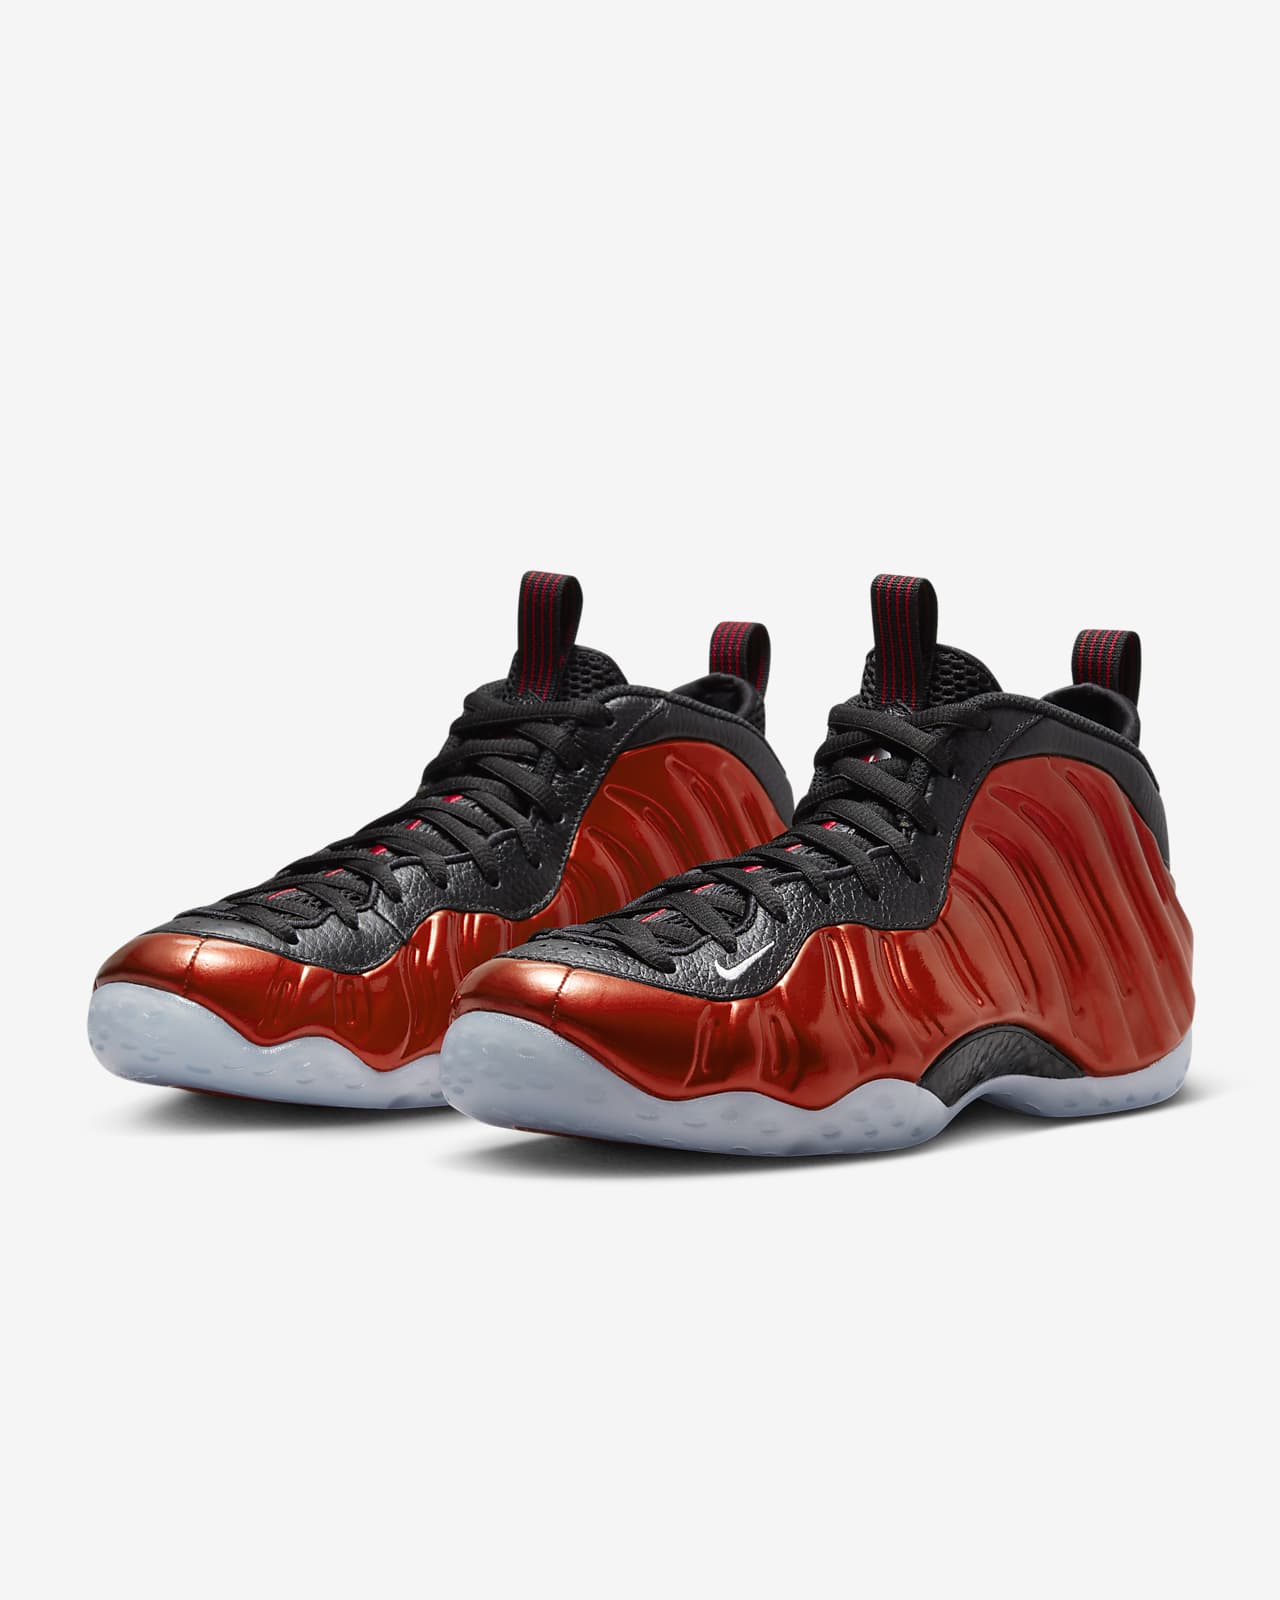 Nike Air Foamposite One Men's Shoes Size 8 (Red)